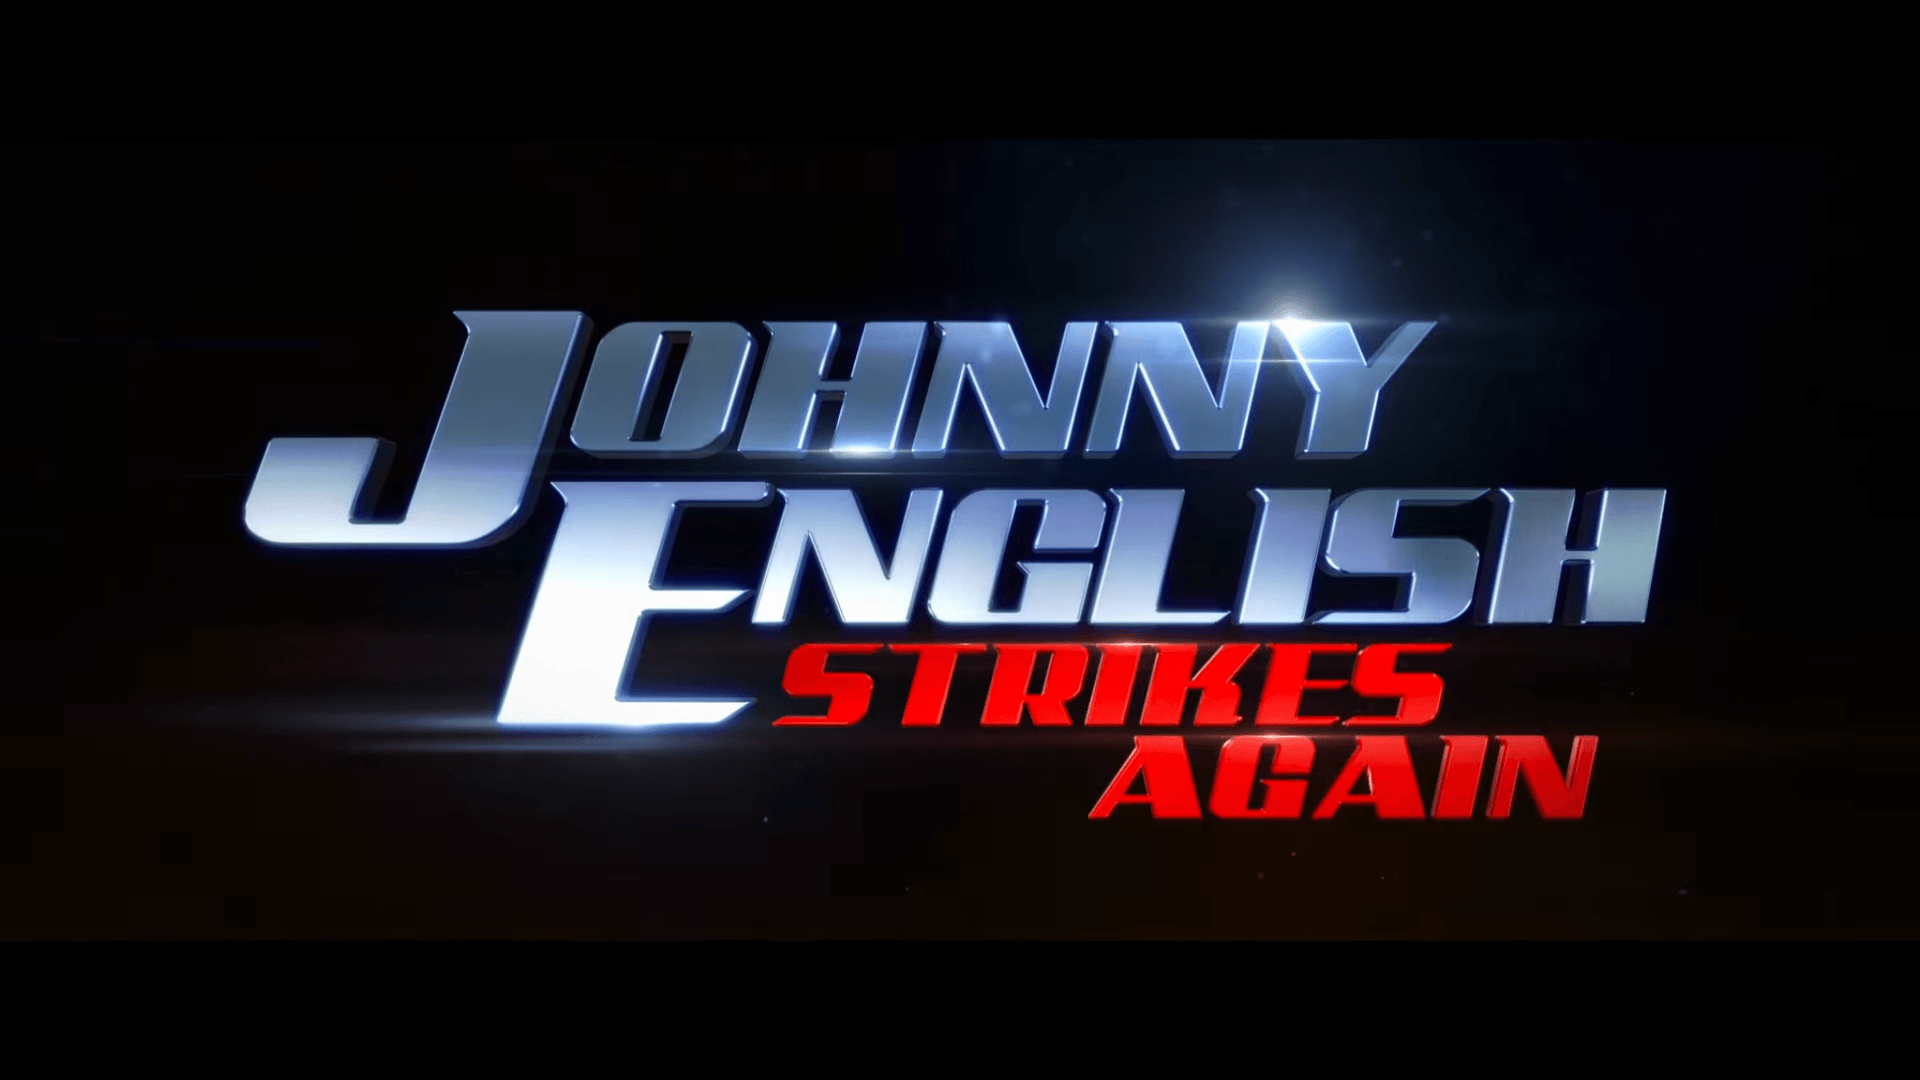 Johnny English Strikes Again: Release Date, Cast, and Plot